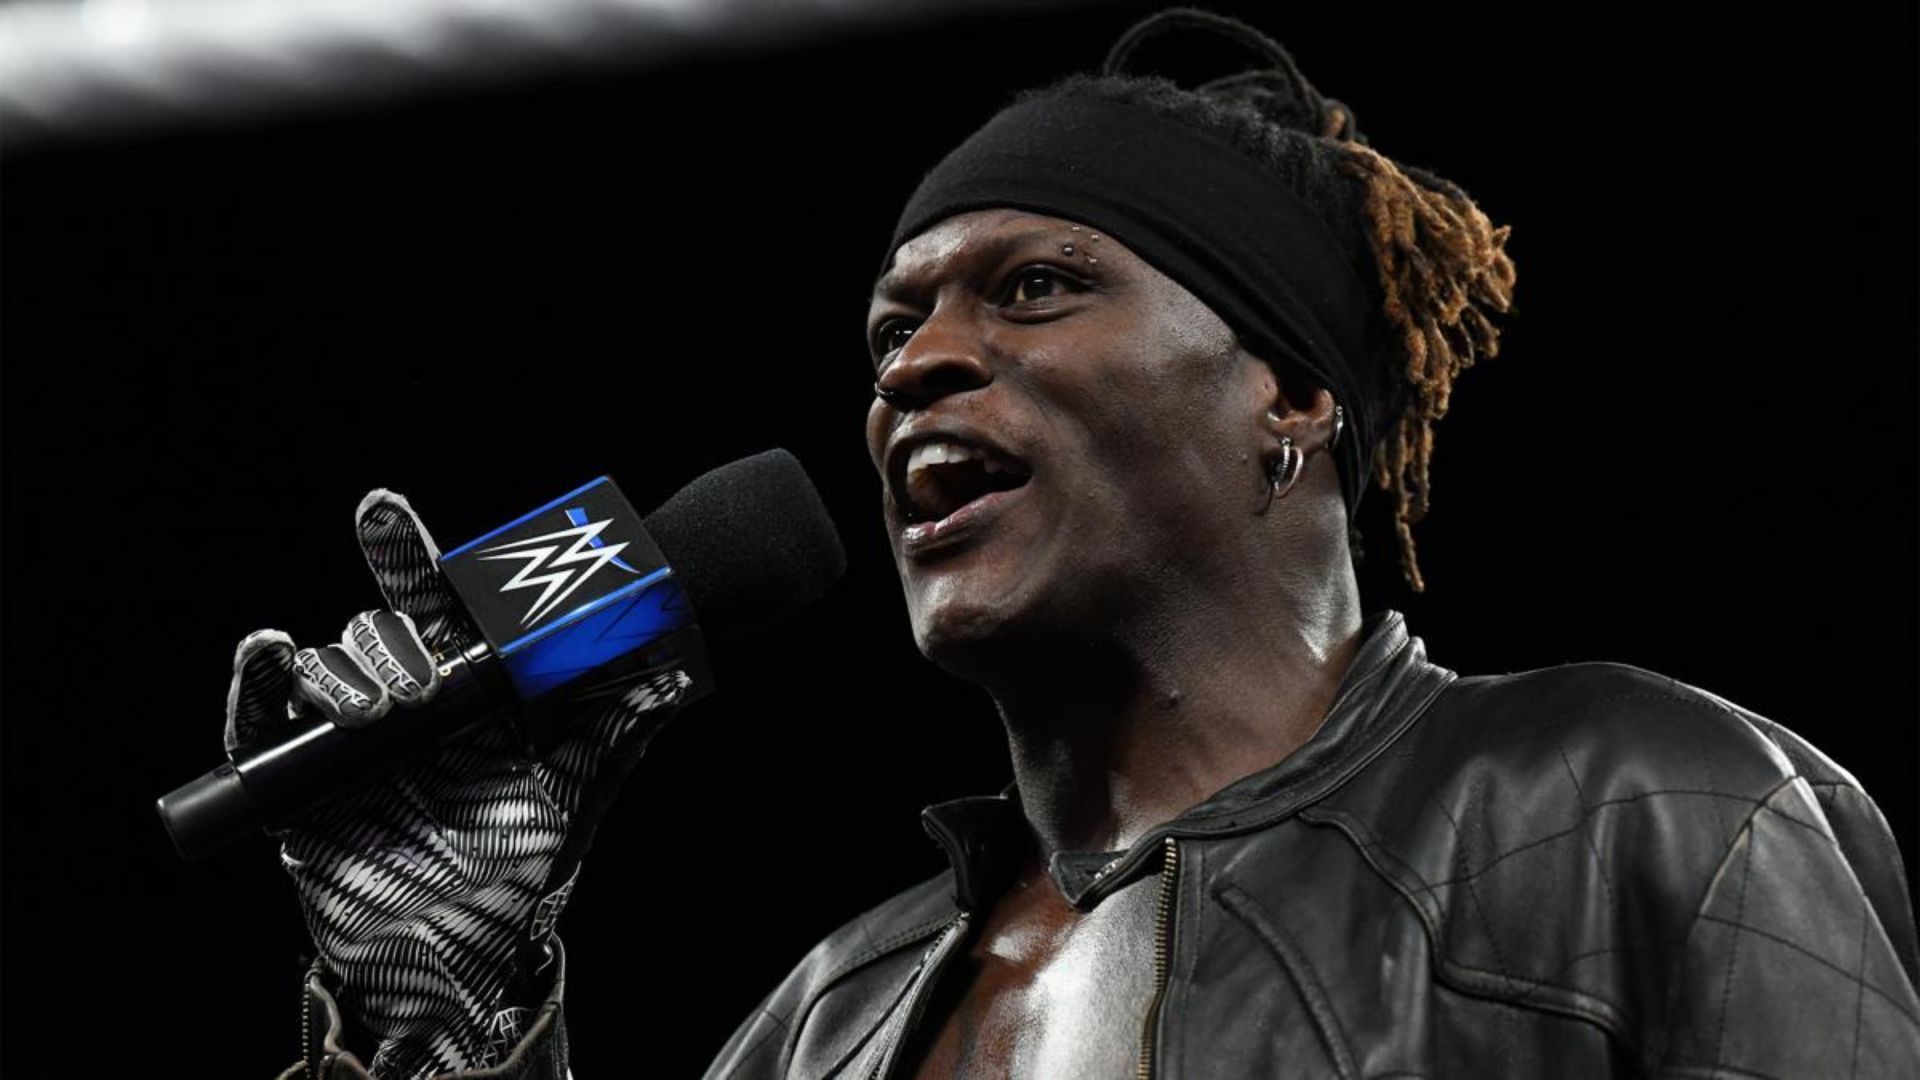 R-Truth formed a short-lived alliance with Bubba Ray Dudley